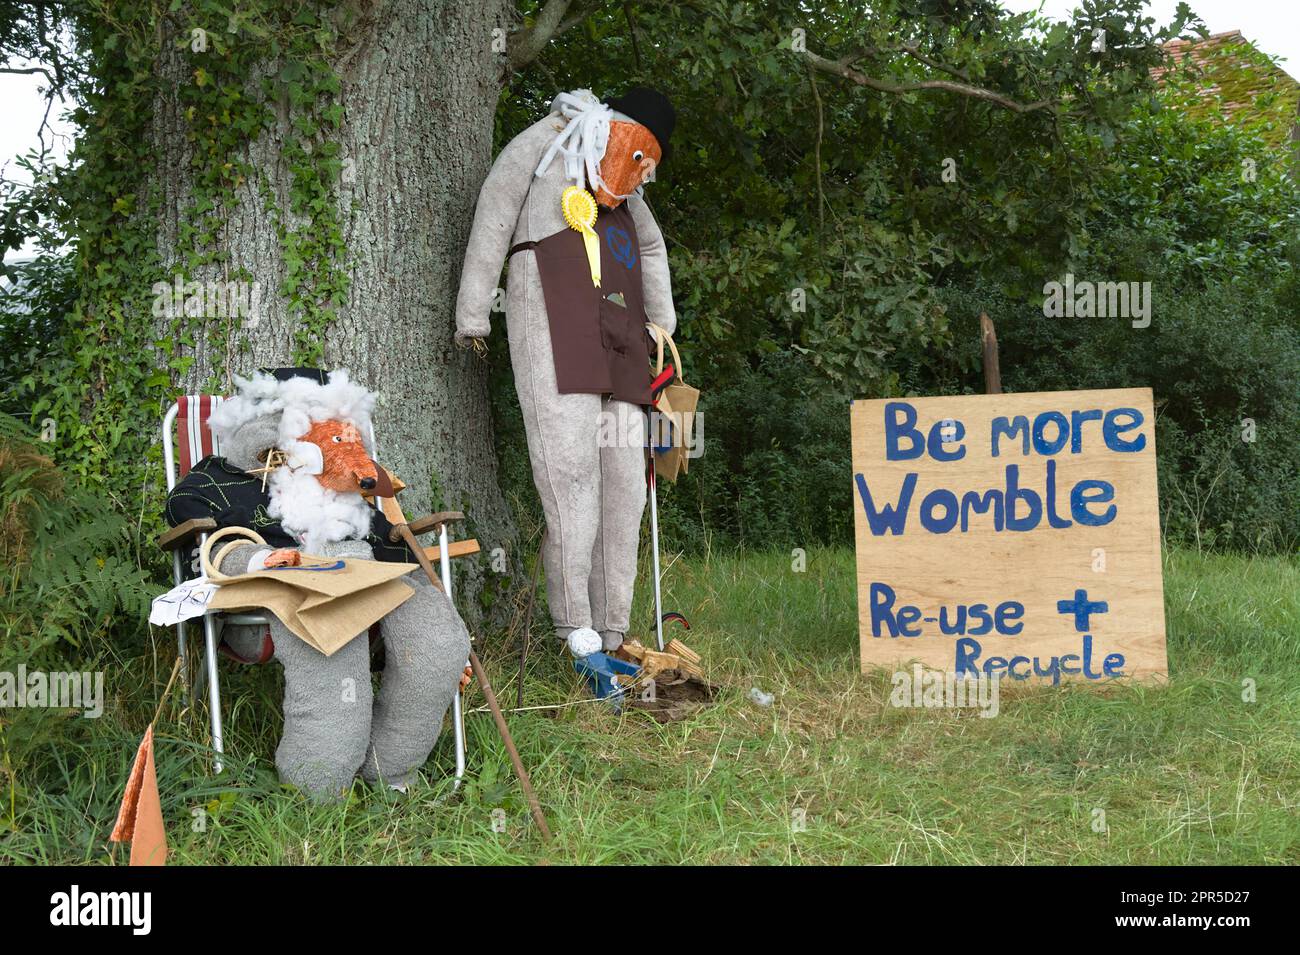 Scarecrows Dressed As The Wombles With A Recycling, Reuse Message, Part Of The Bisterne Annual Scarecrow Festival, Ringwood, England UK Stock Photo